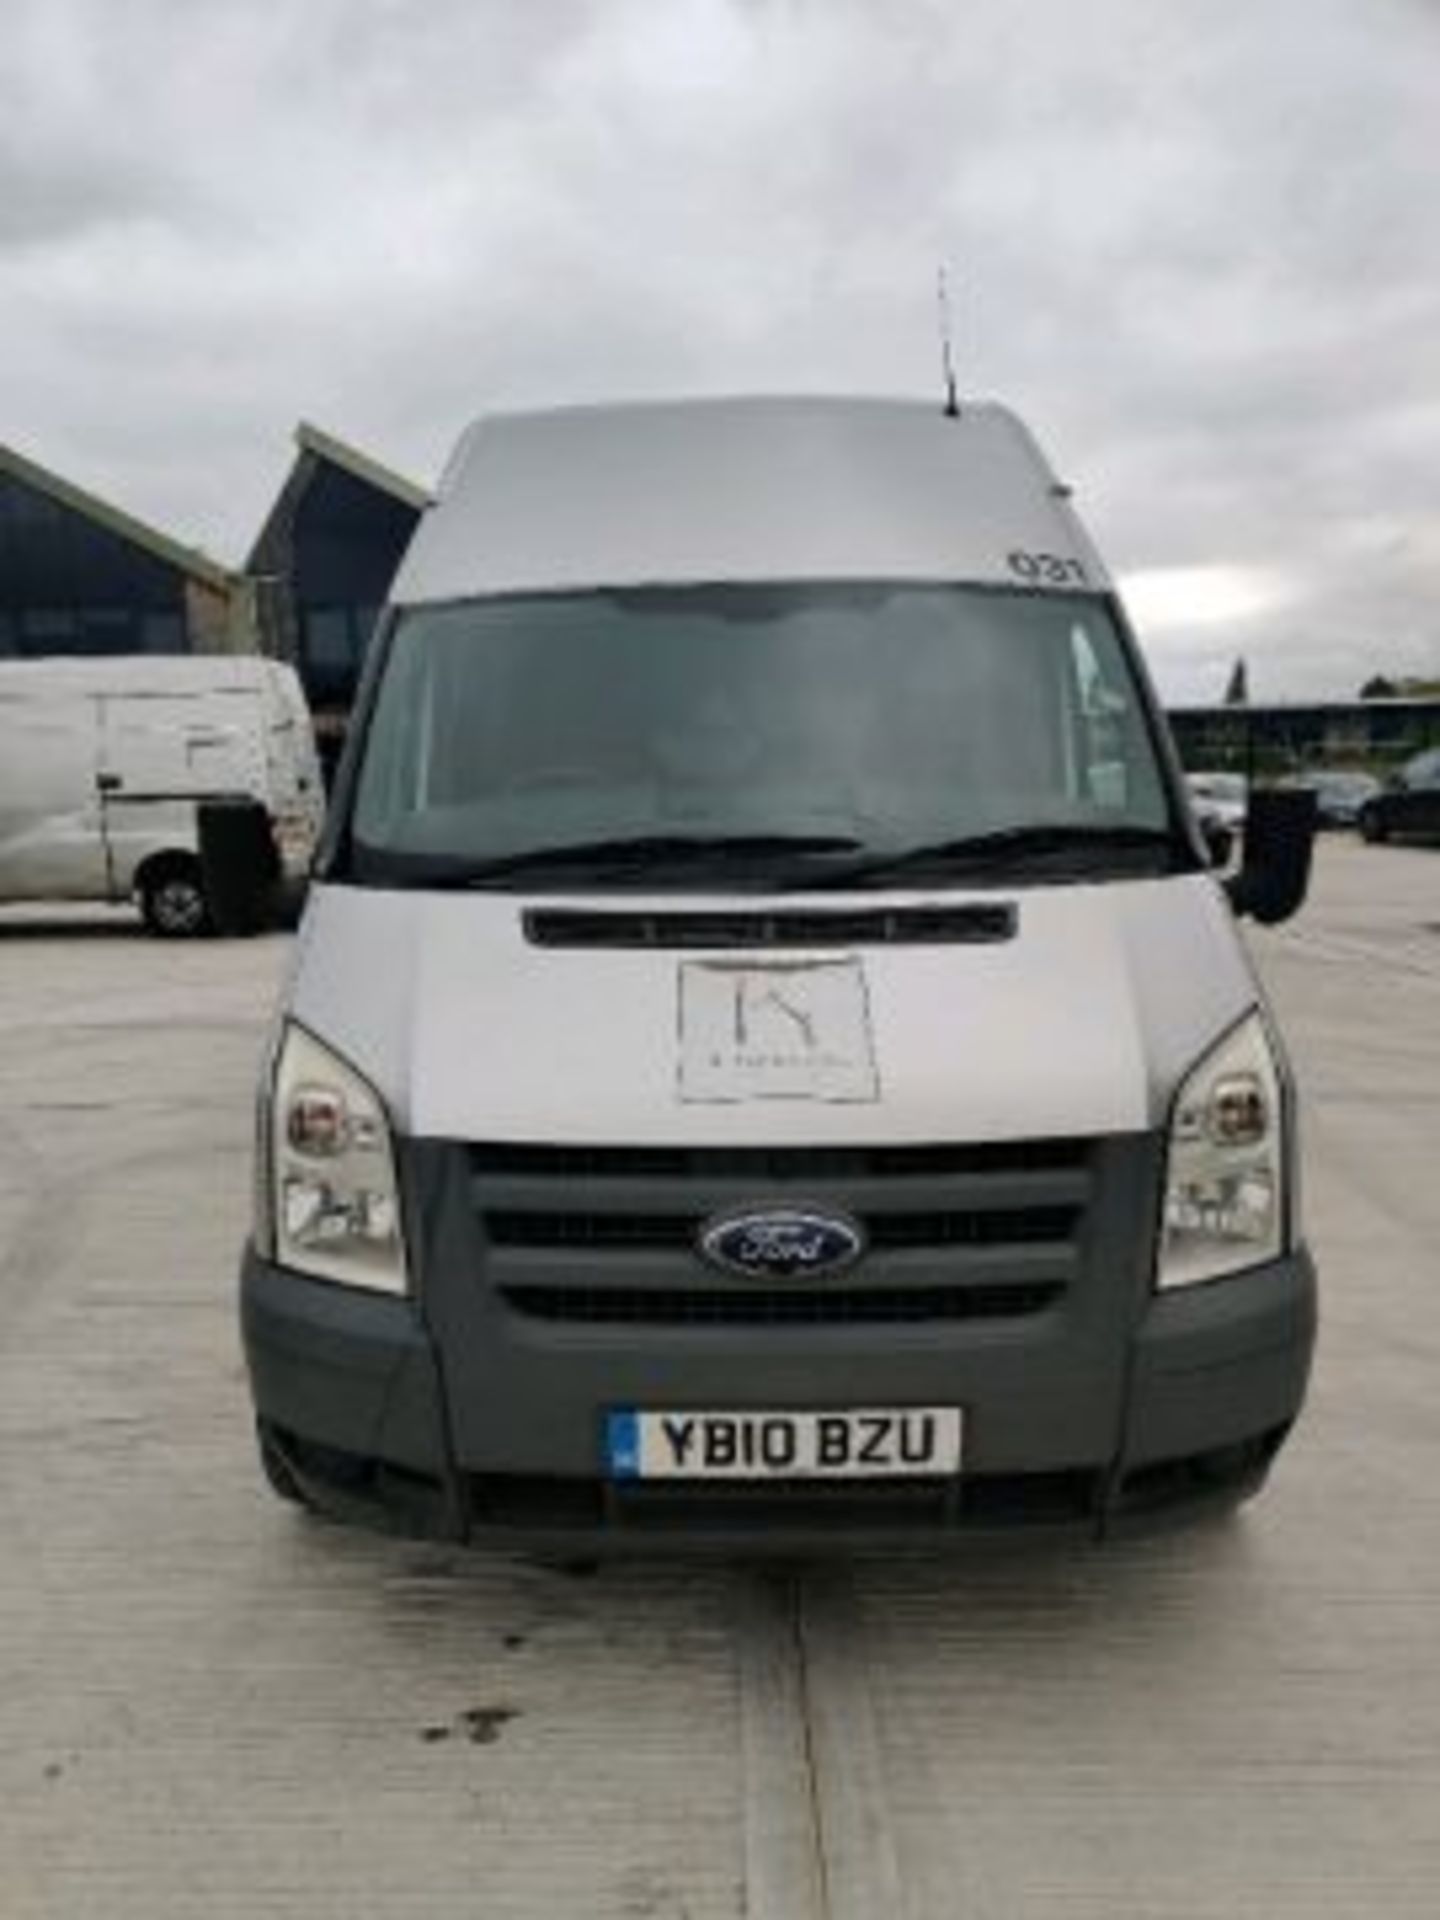 ENTRY DIRECT FROM LOCAL AUTHORITY Ford Transit 115 T350M RWD panel van Reg: YB10BZU